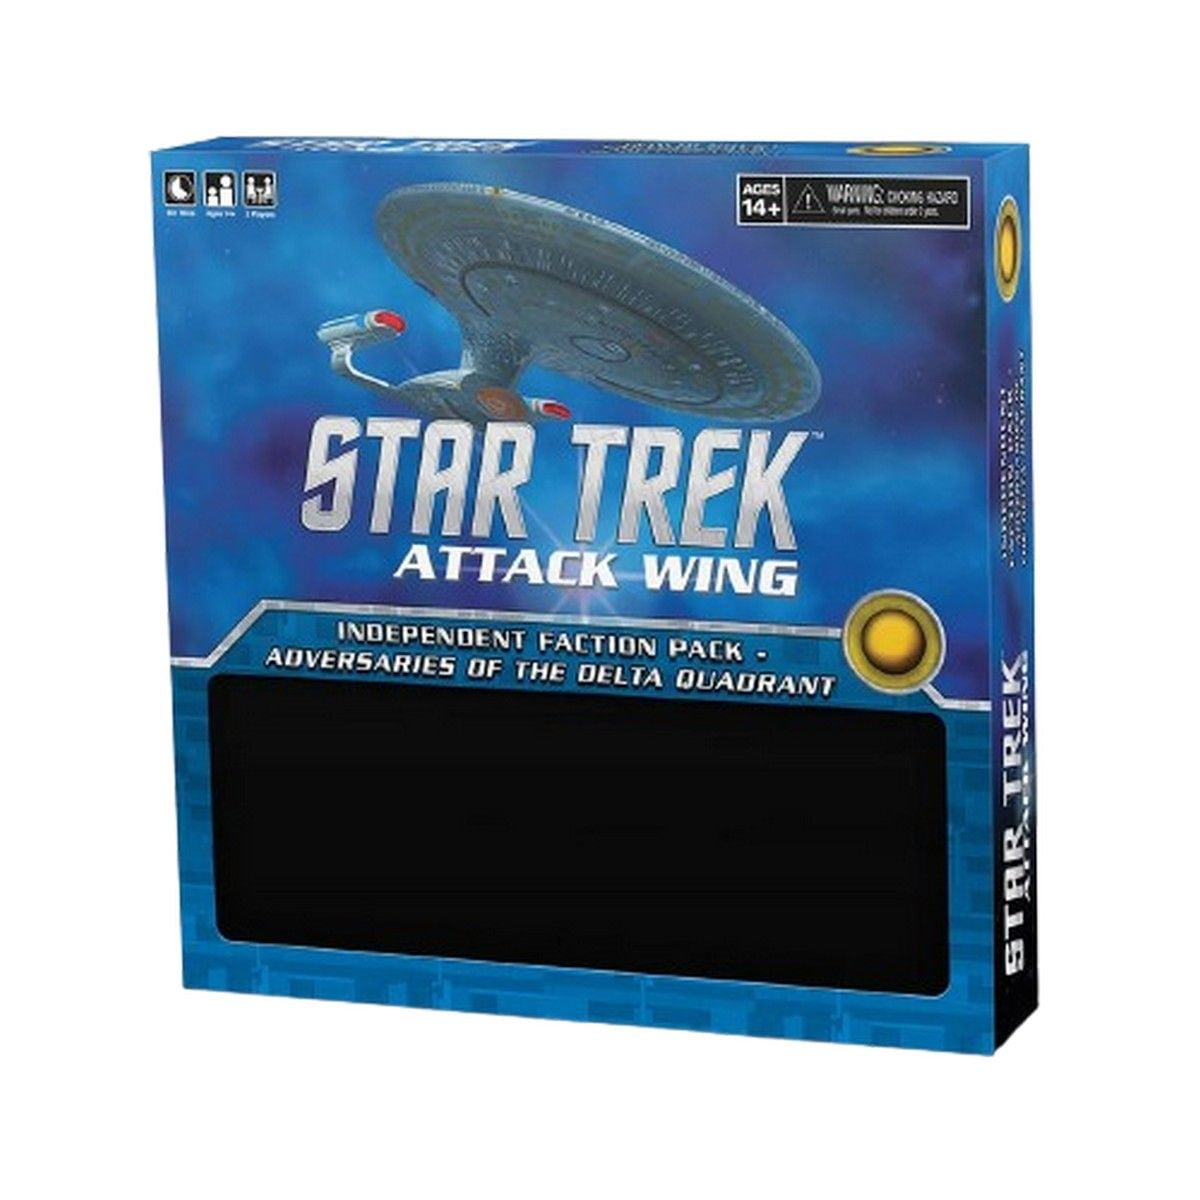 Star Trek Attack Wing: Independent Faction Pack - Adversaries of the Delta Quadrant